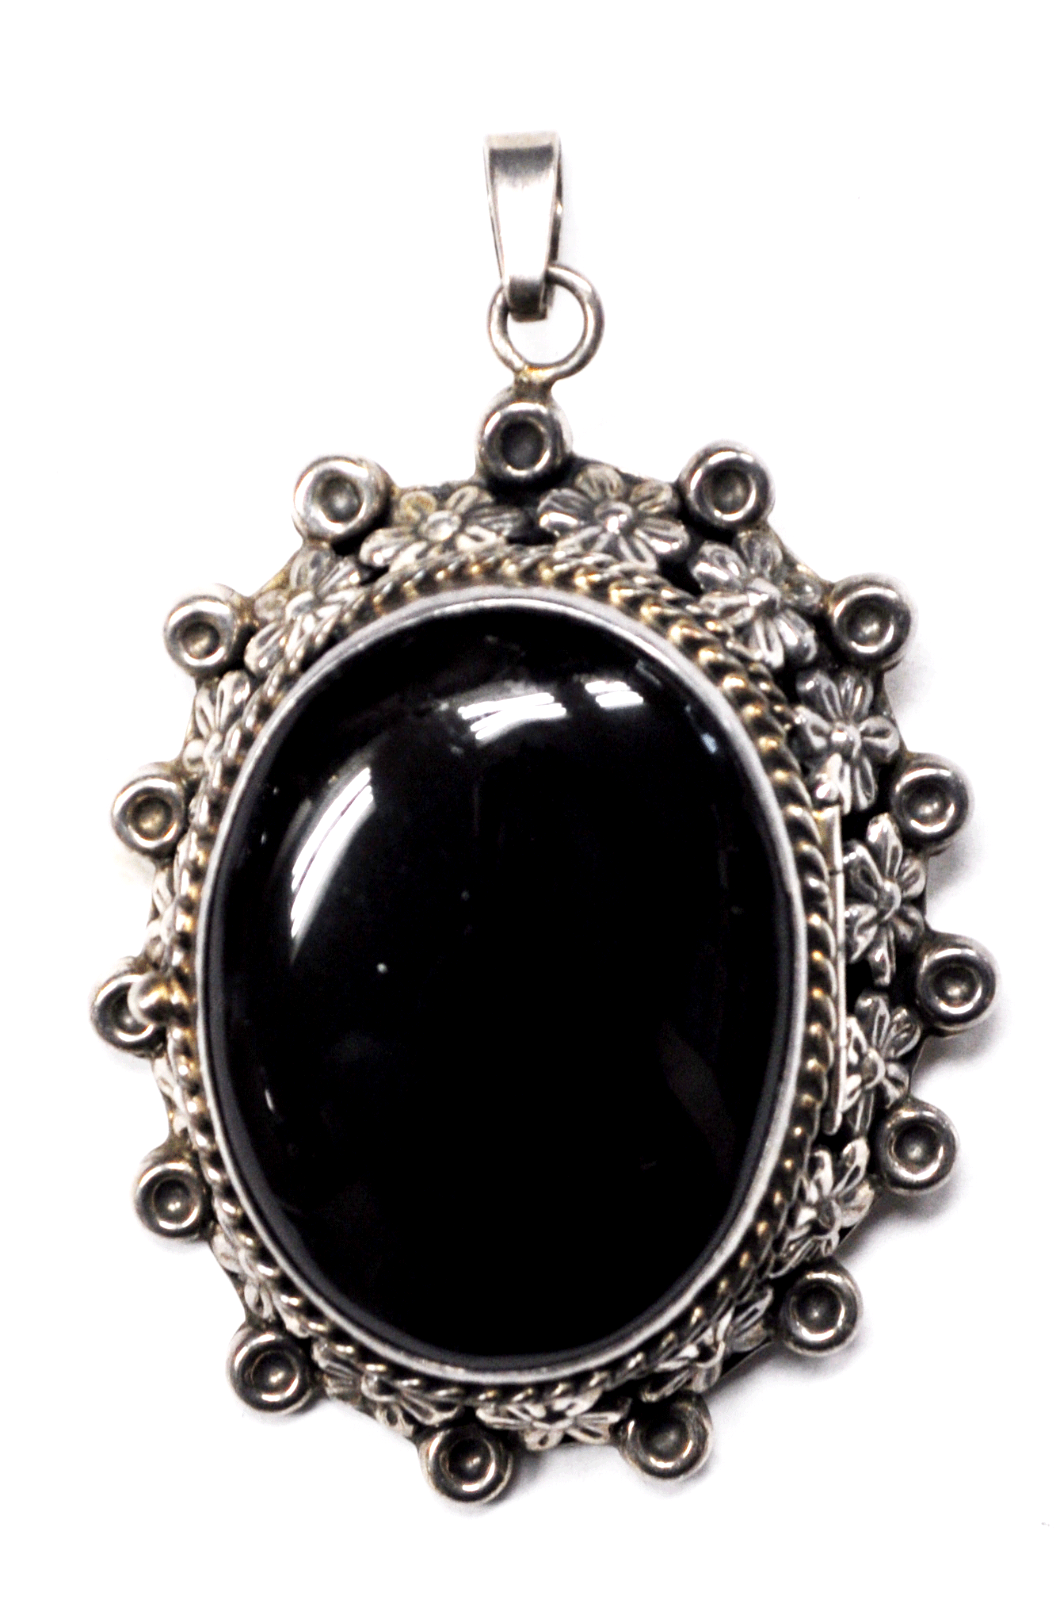 Sterling Silver Mexico Black Onyx Oval T5-79 Large Pendant Brooch 2-7/8" x 1-7/8